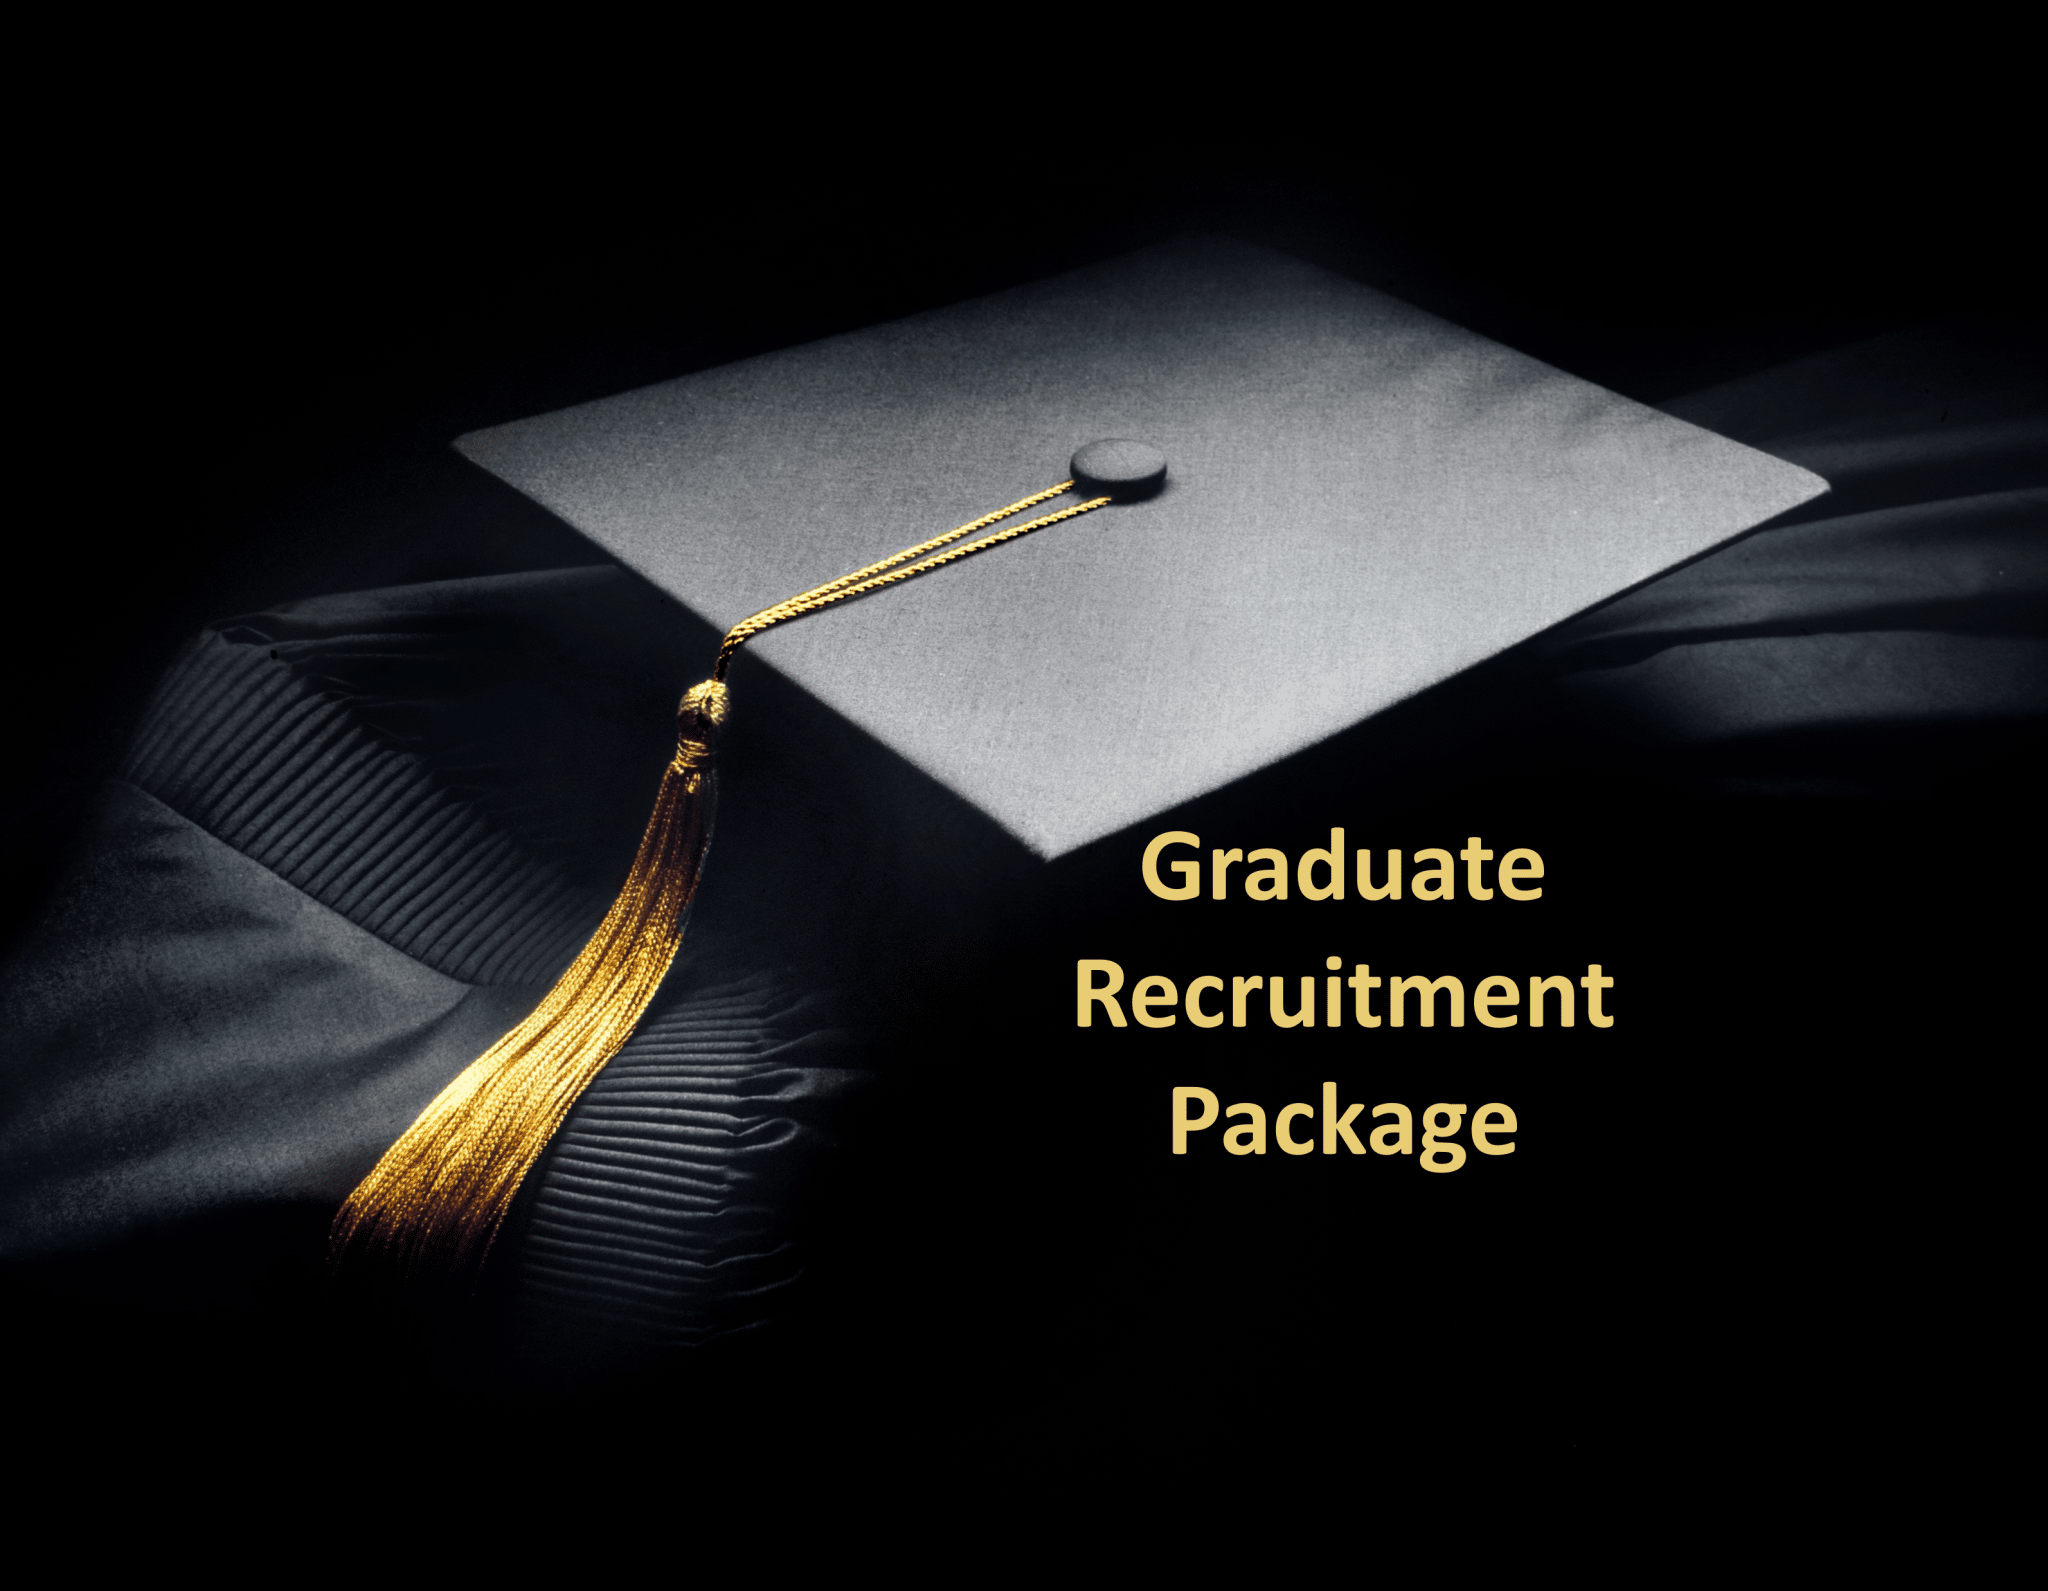 Recommended Graduate Recruitment Package includes SHL scenarios